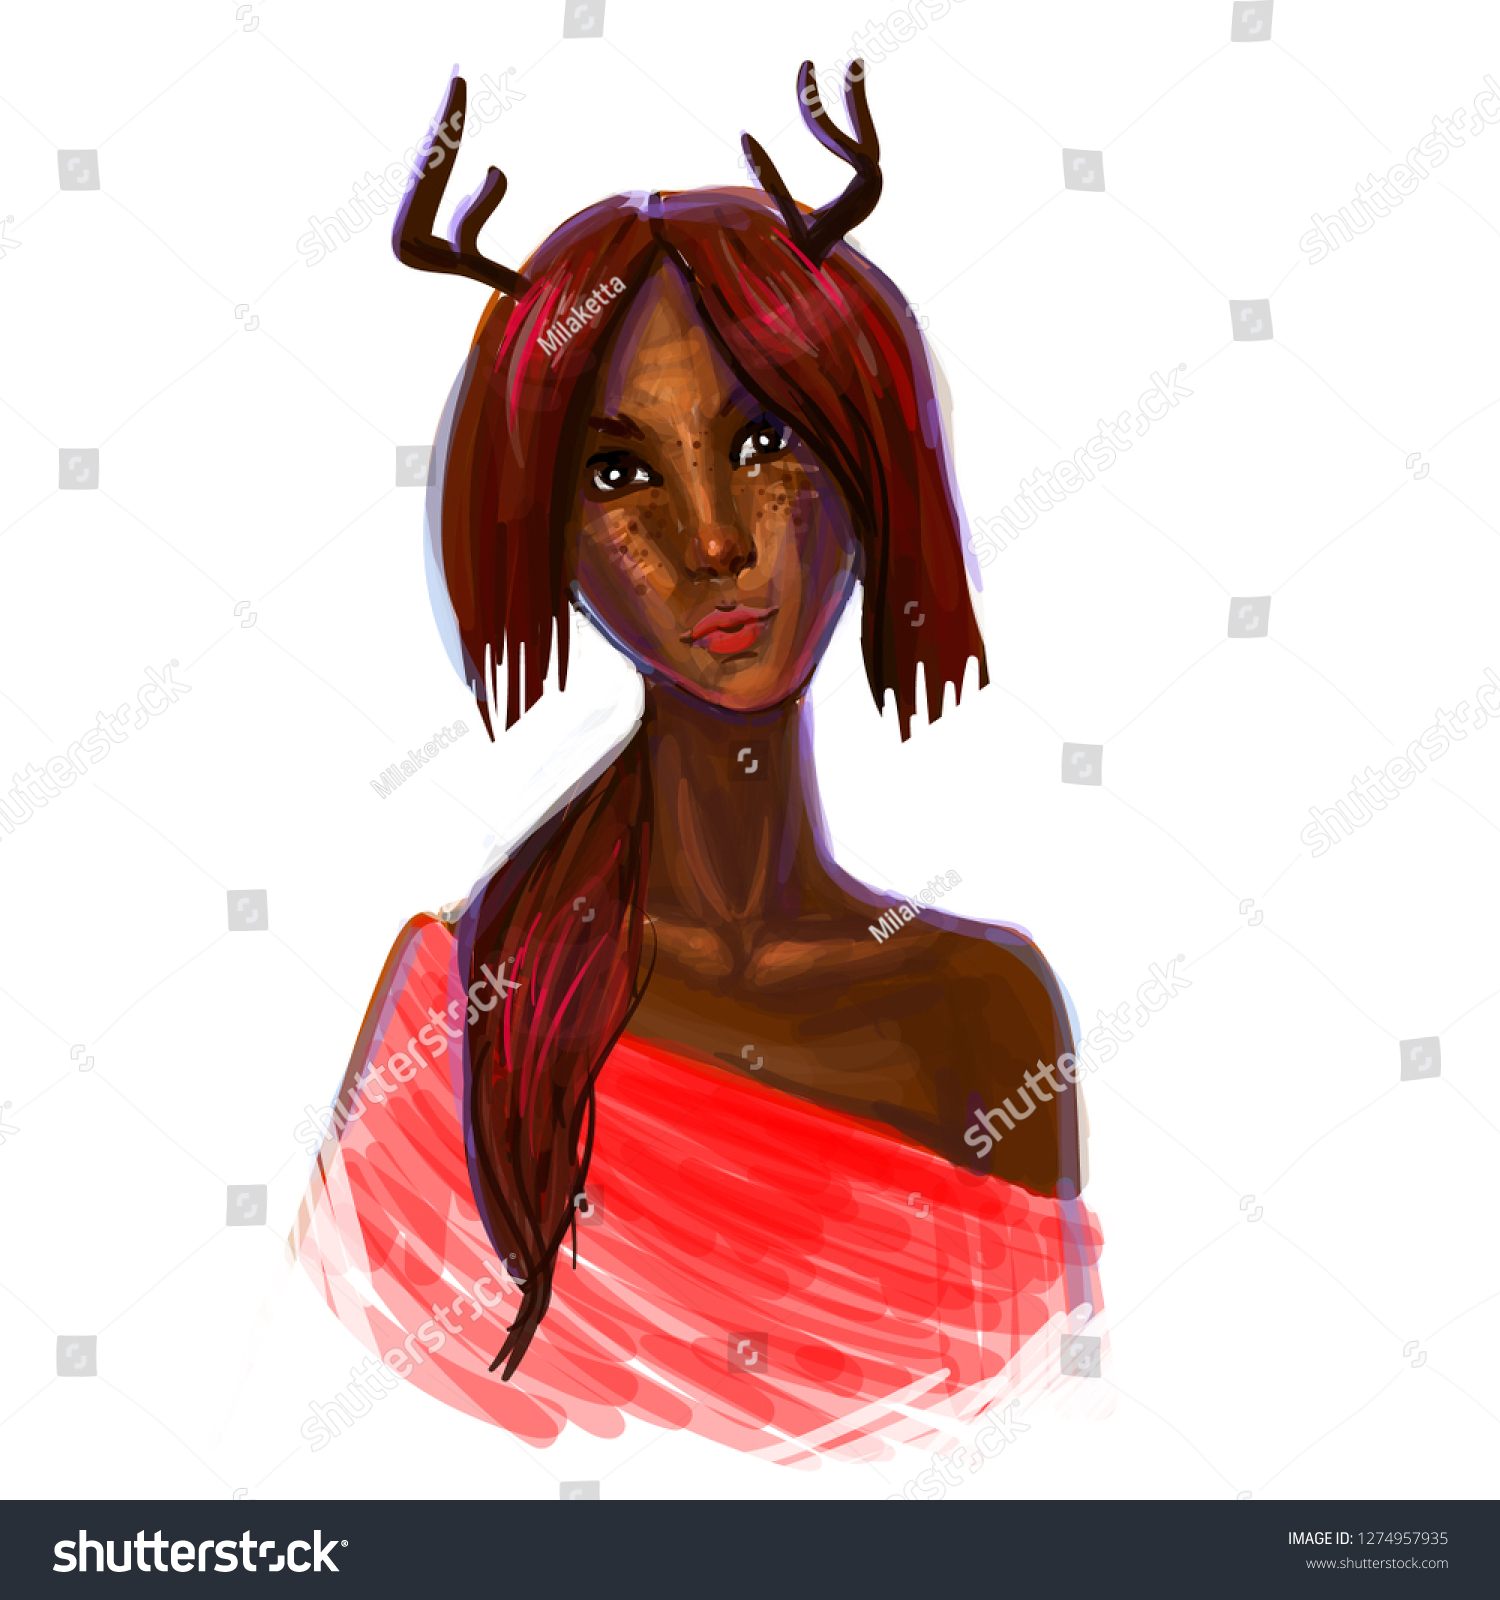 Hand Drawn Portrait Of A Dark Skinned Girl With Royalty Free Stock Vector 1274957935 6856